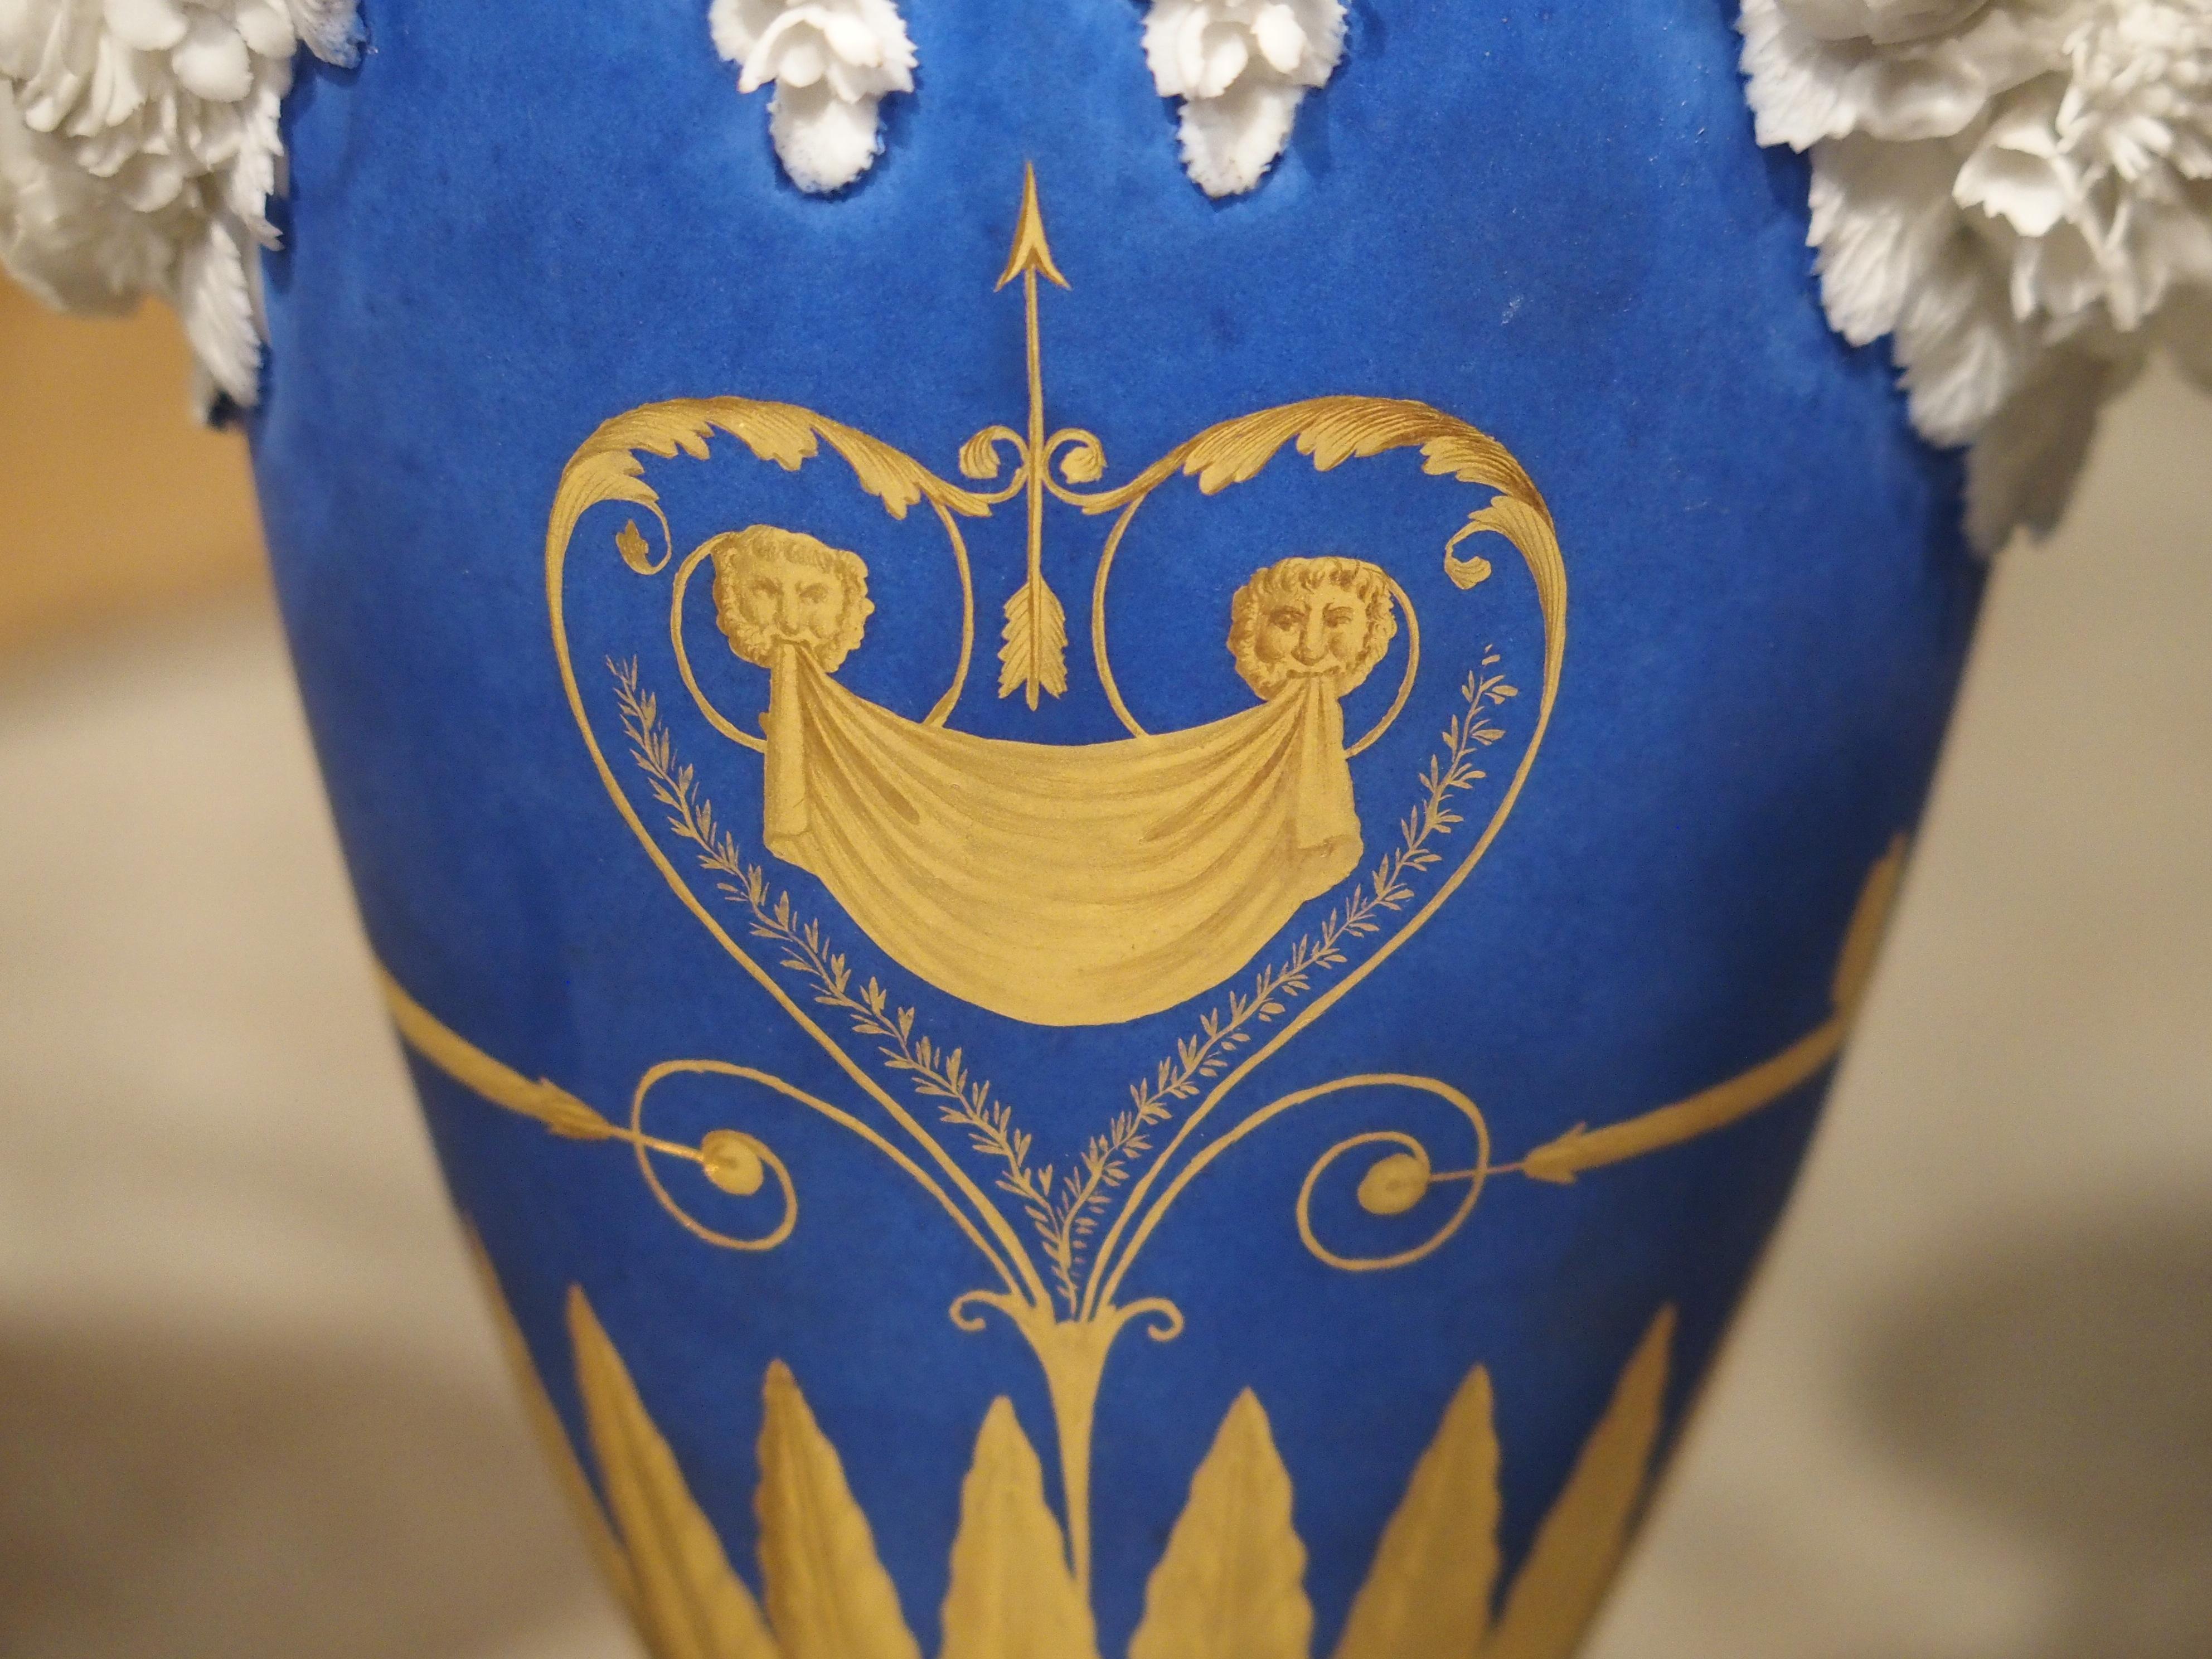 Pair of Neoclassical Paris Porcelain Vases in Royal French Blue, Early 1800s For Sale 7